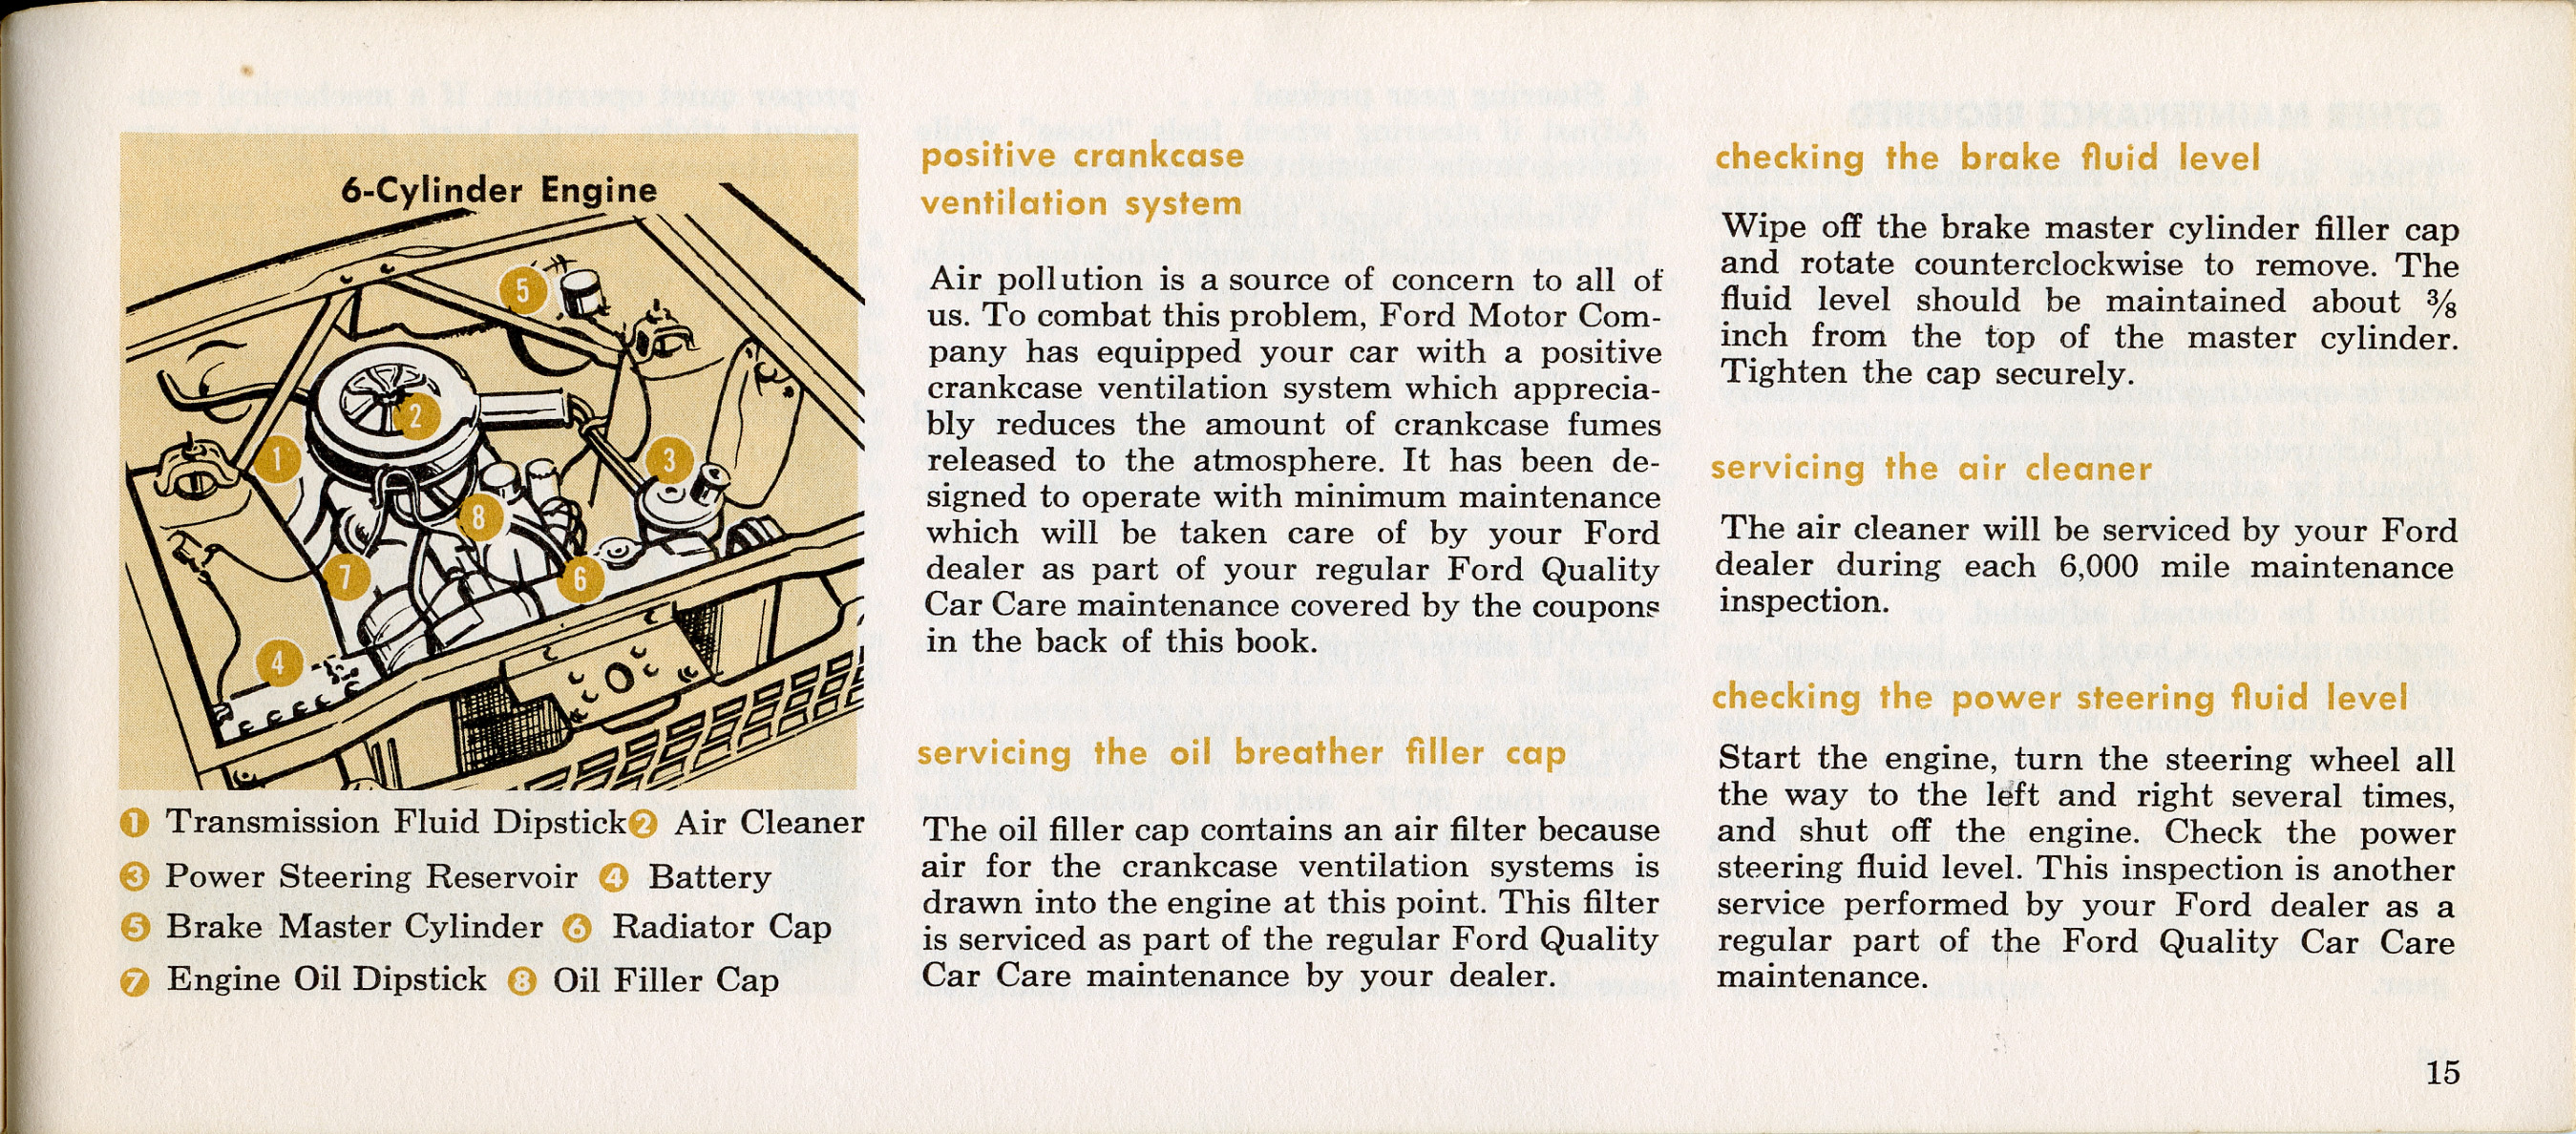 1964 Ford Falcon Owners Manual-15